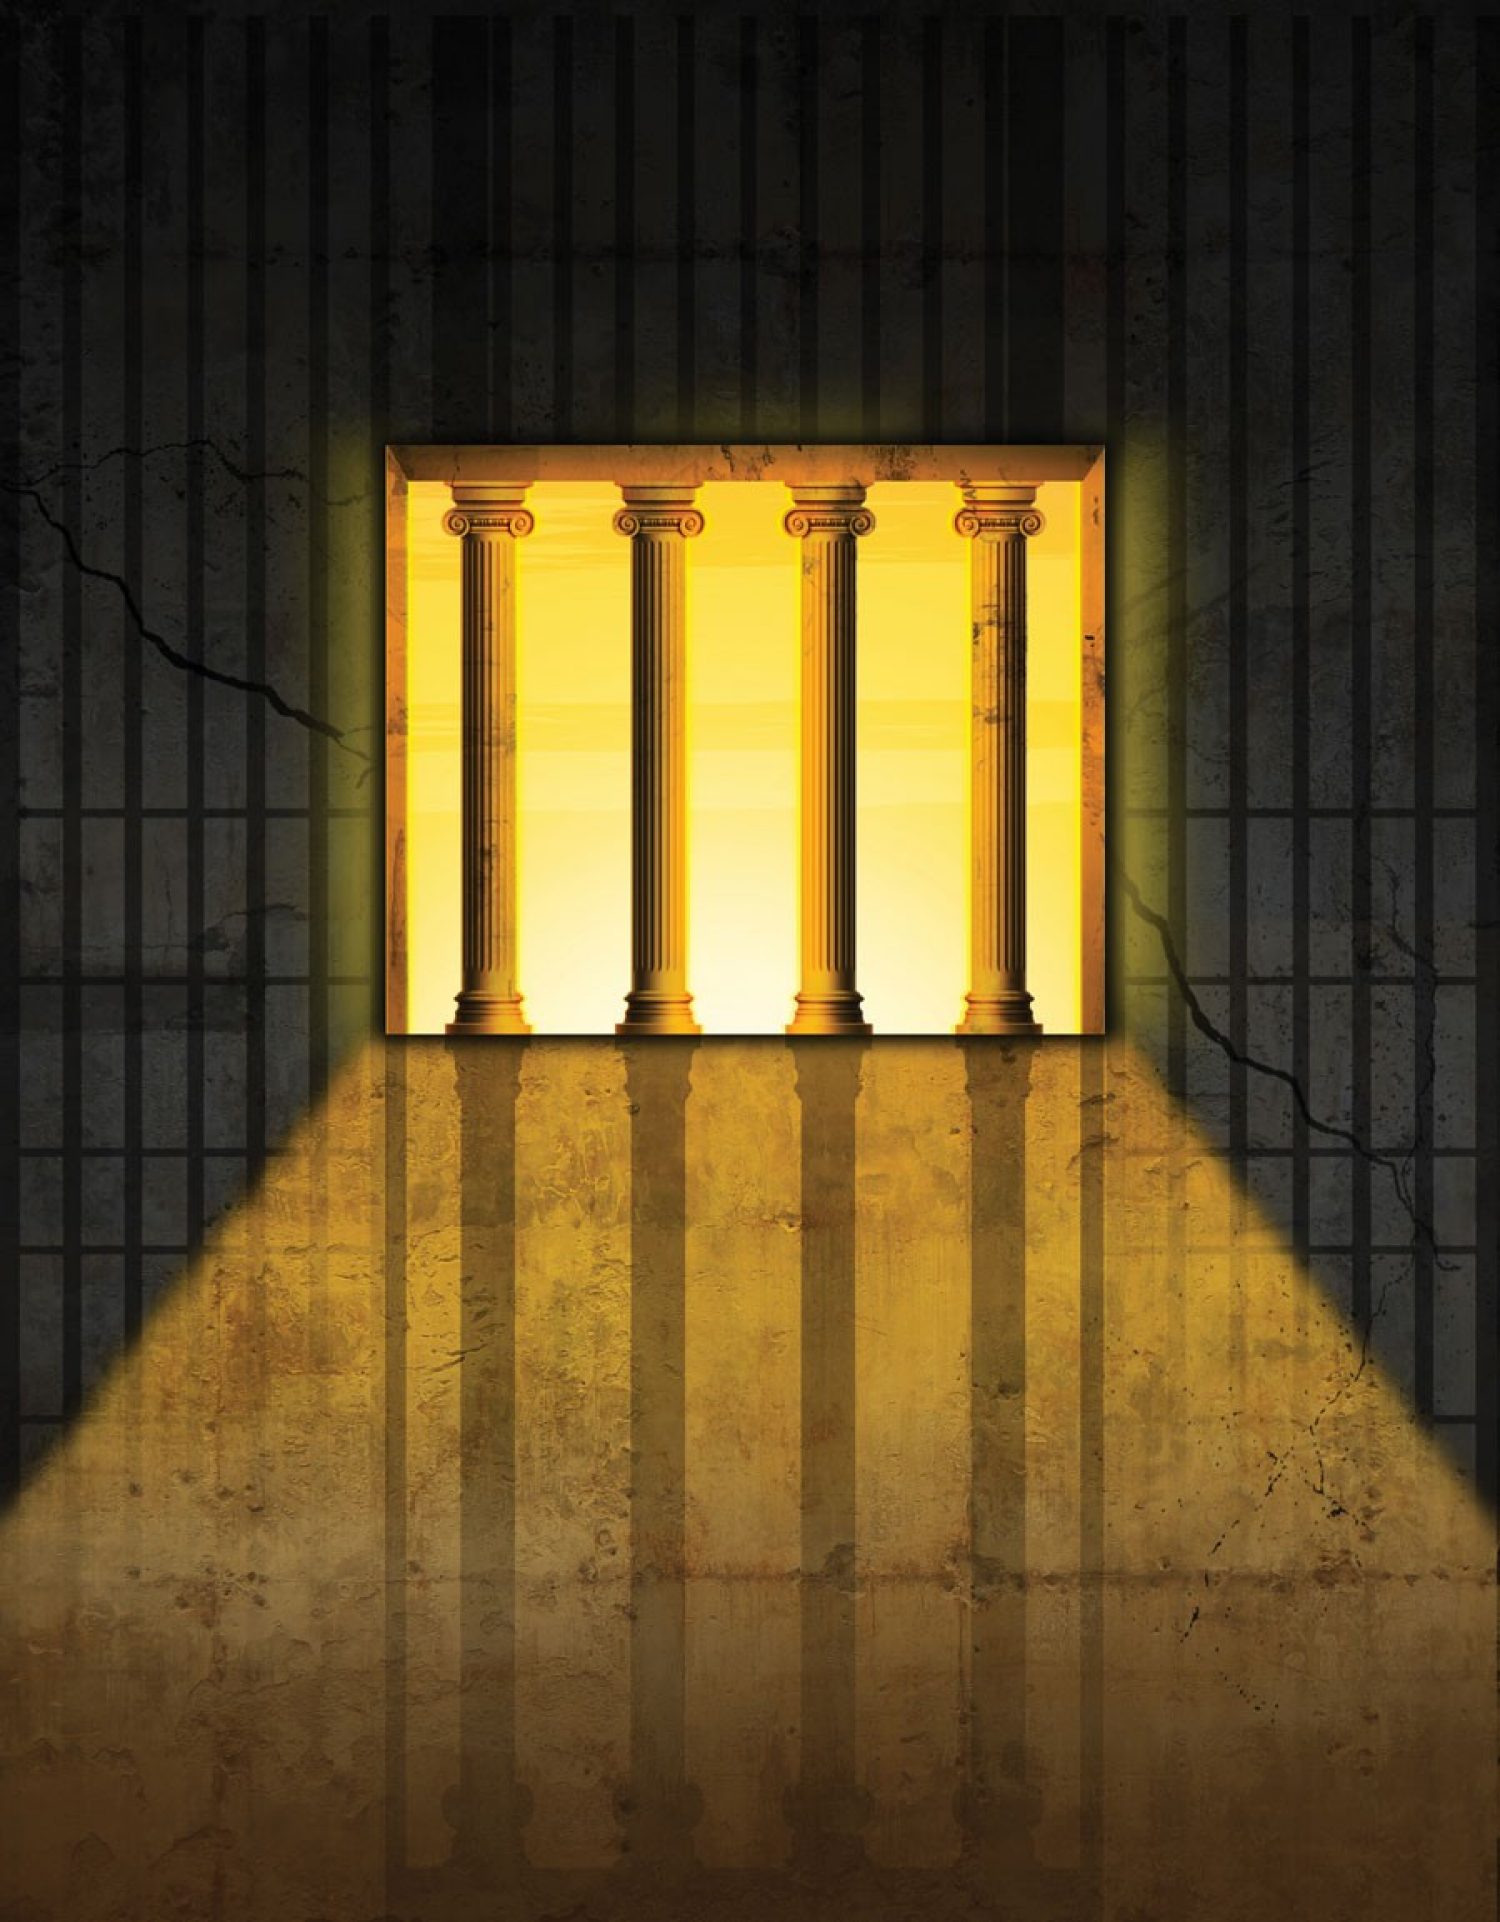 An illustration showing prison bars superimposed over columns invoking the Halls of Justice.